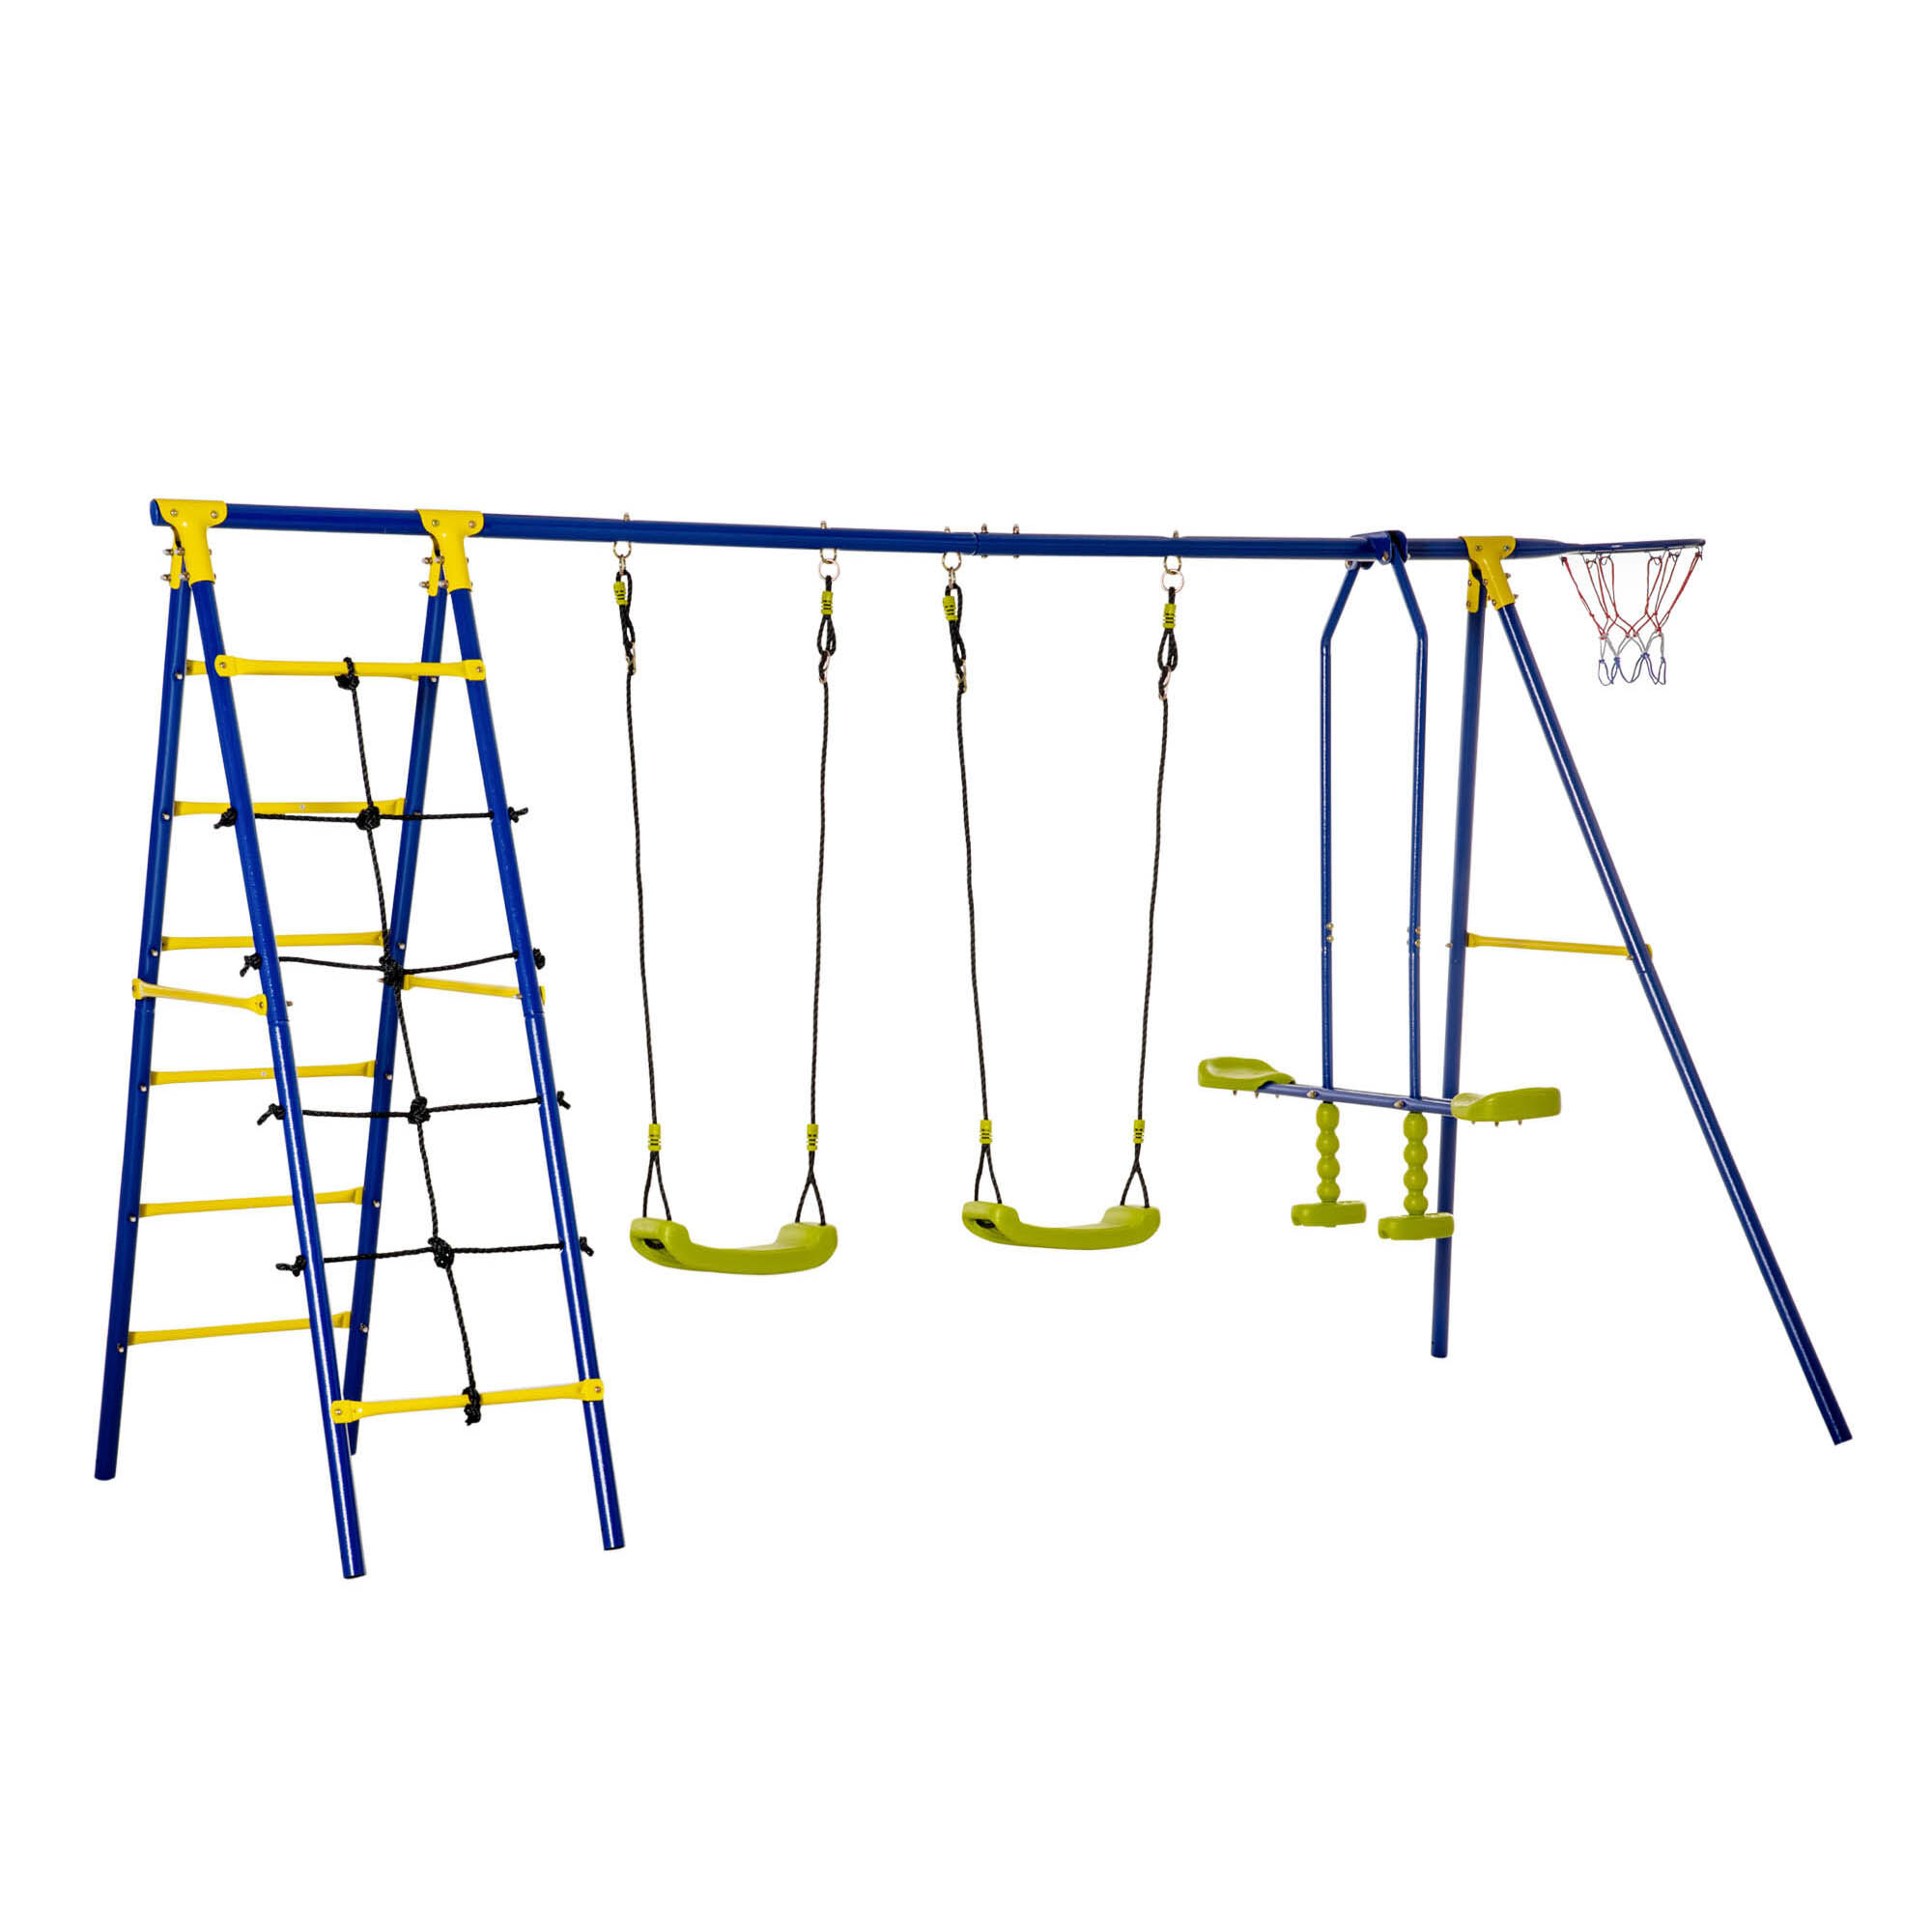 Outsunny Backyard Kids Swing Set with Adjustable Seat Glider Basket Hoop Climb Ladder Rope A-Frame Metal Outdoor Play Equipment   Aosom.com